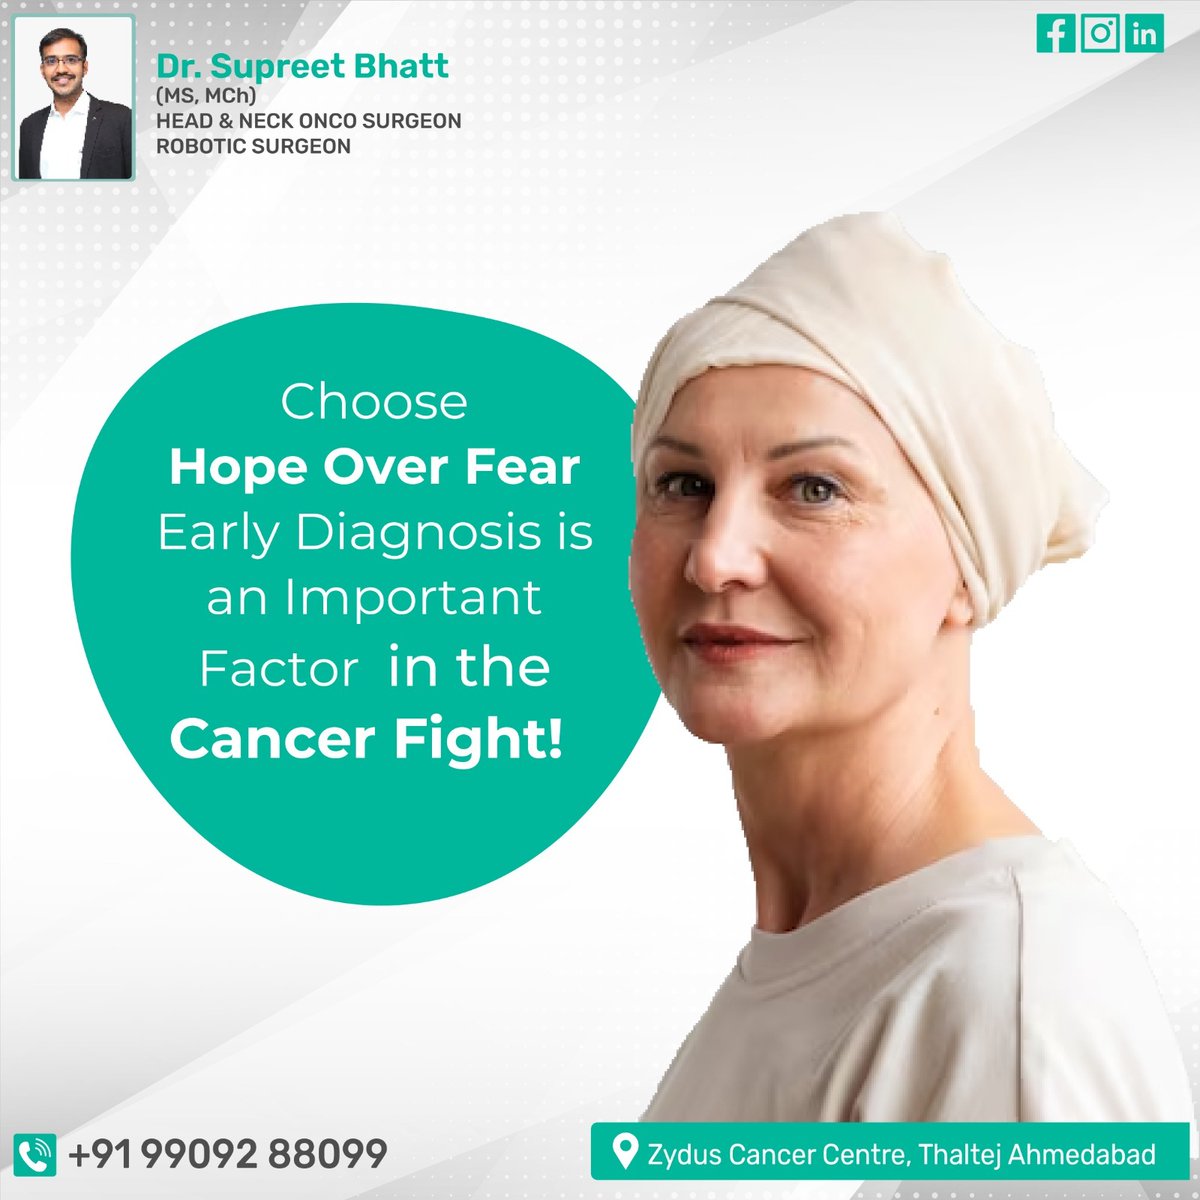 Choose hope over fear.
Early diagnosis is an important factor in the cancer fight!

#drsupreetbhatt #ChooseHope #EarlyDiagnosisSavesLives #CancerAwareness #FightCancer #HopeNotFear #CancerPrevention #ScreeningSaves #GetCheckedEarly #CancerFighter #EarlyDetectionMatters